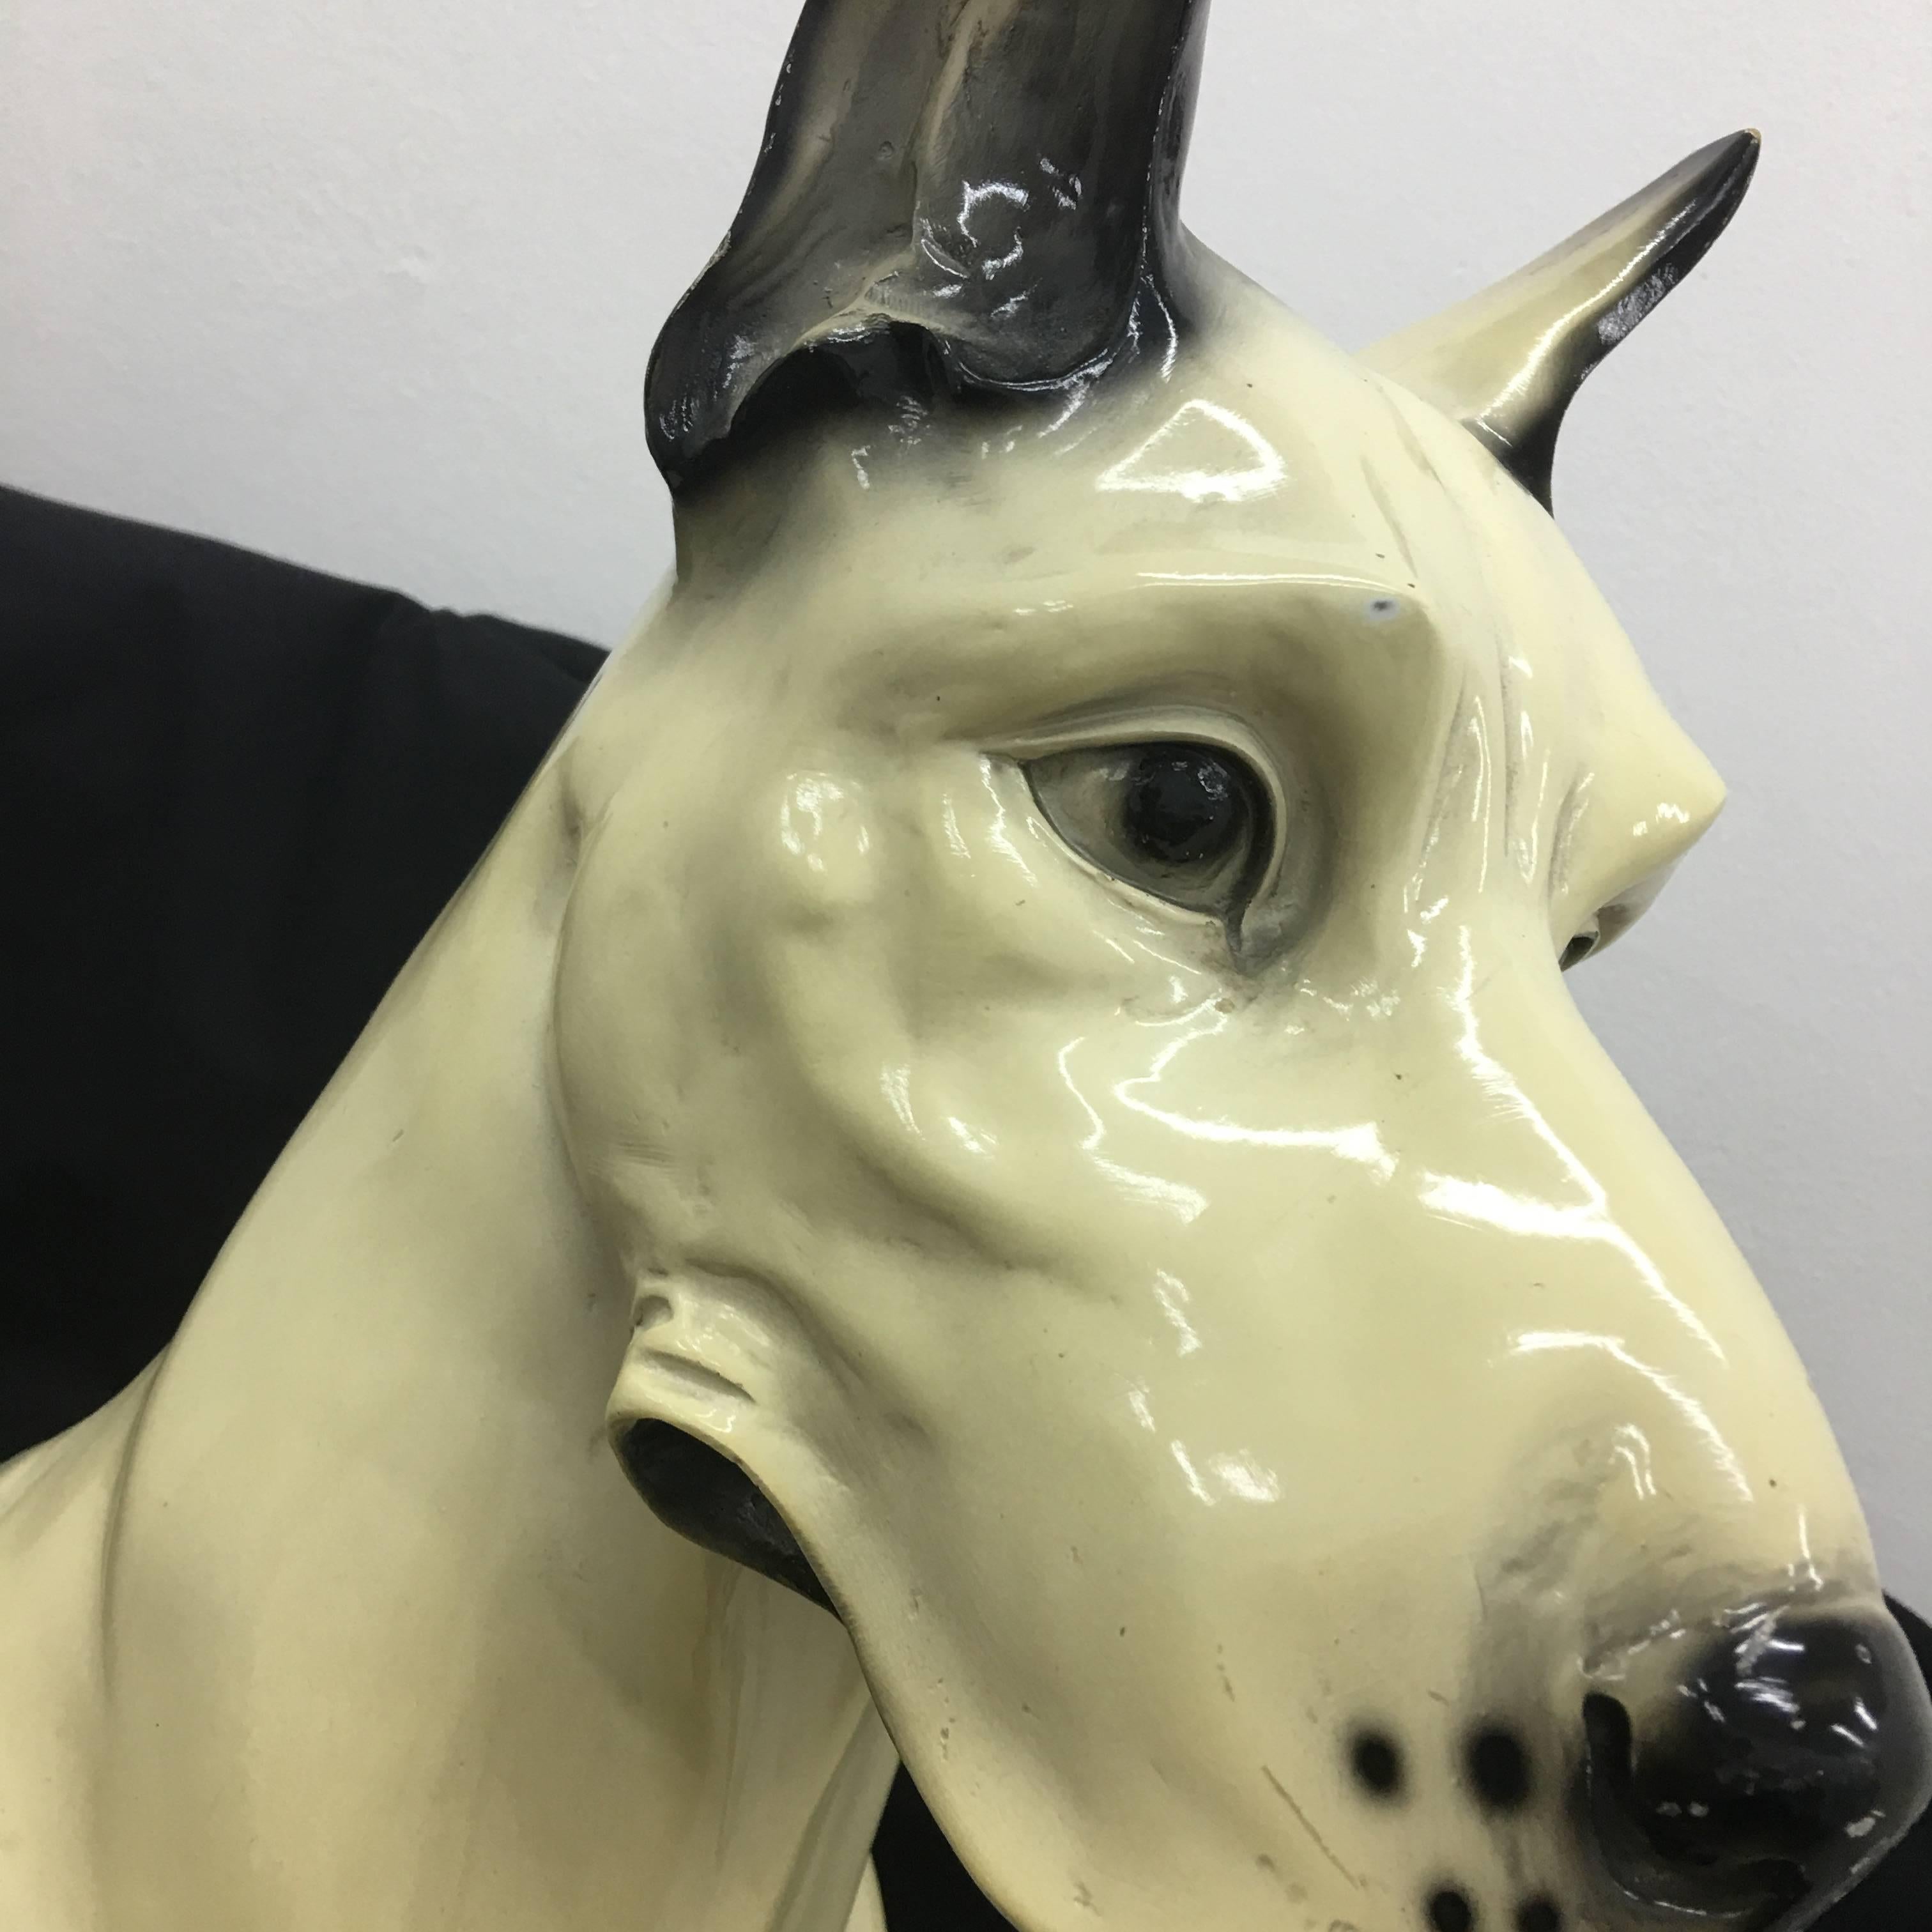 Very rare Italian ceramic Great Dane, made in the 1930s. Little scratch and a small break in the lower part, visible in the photo.